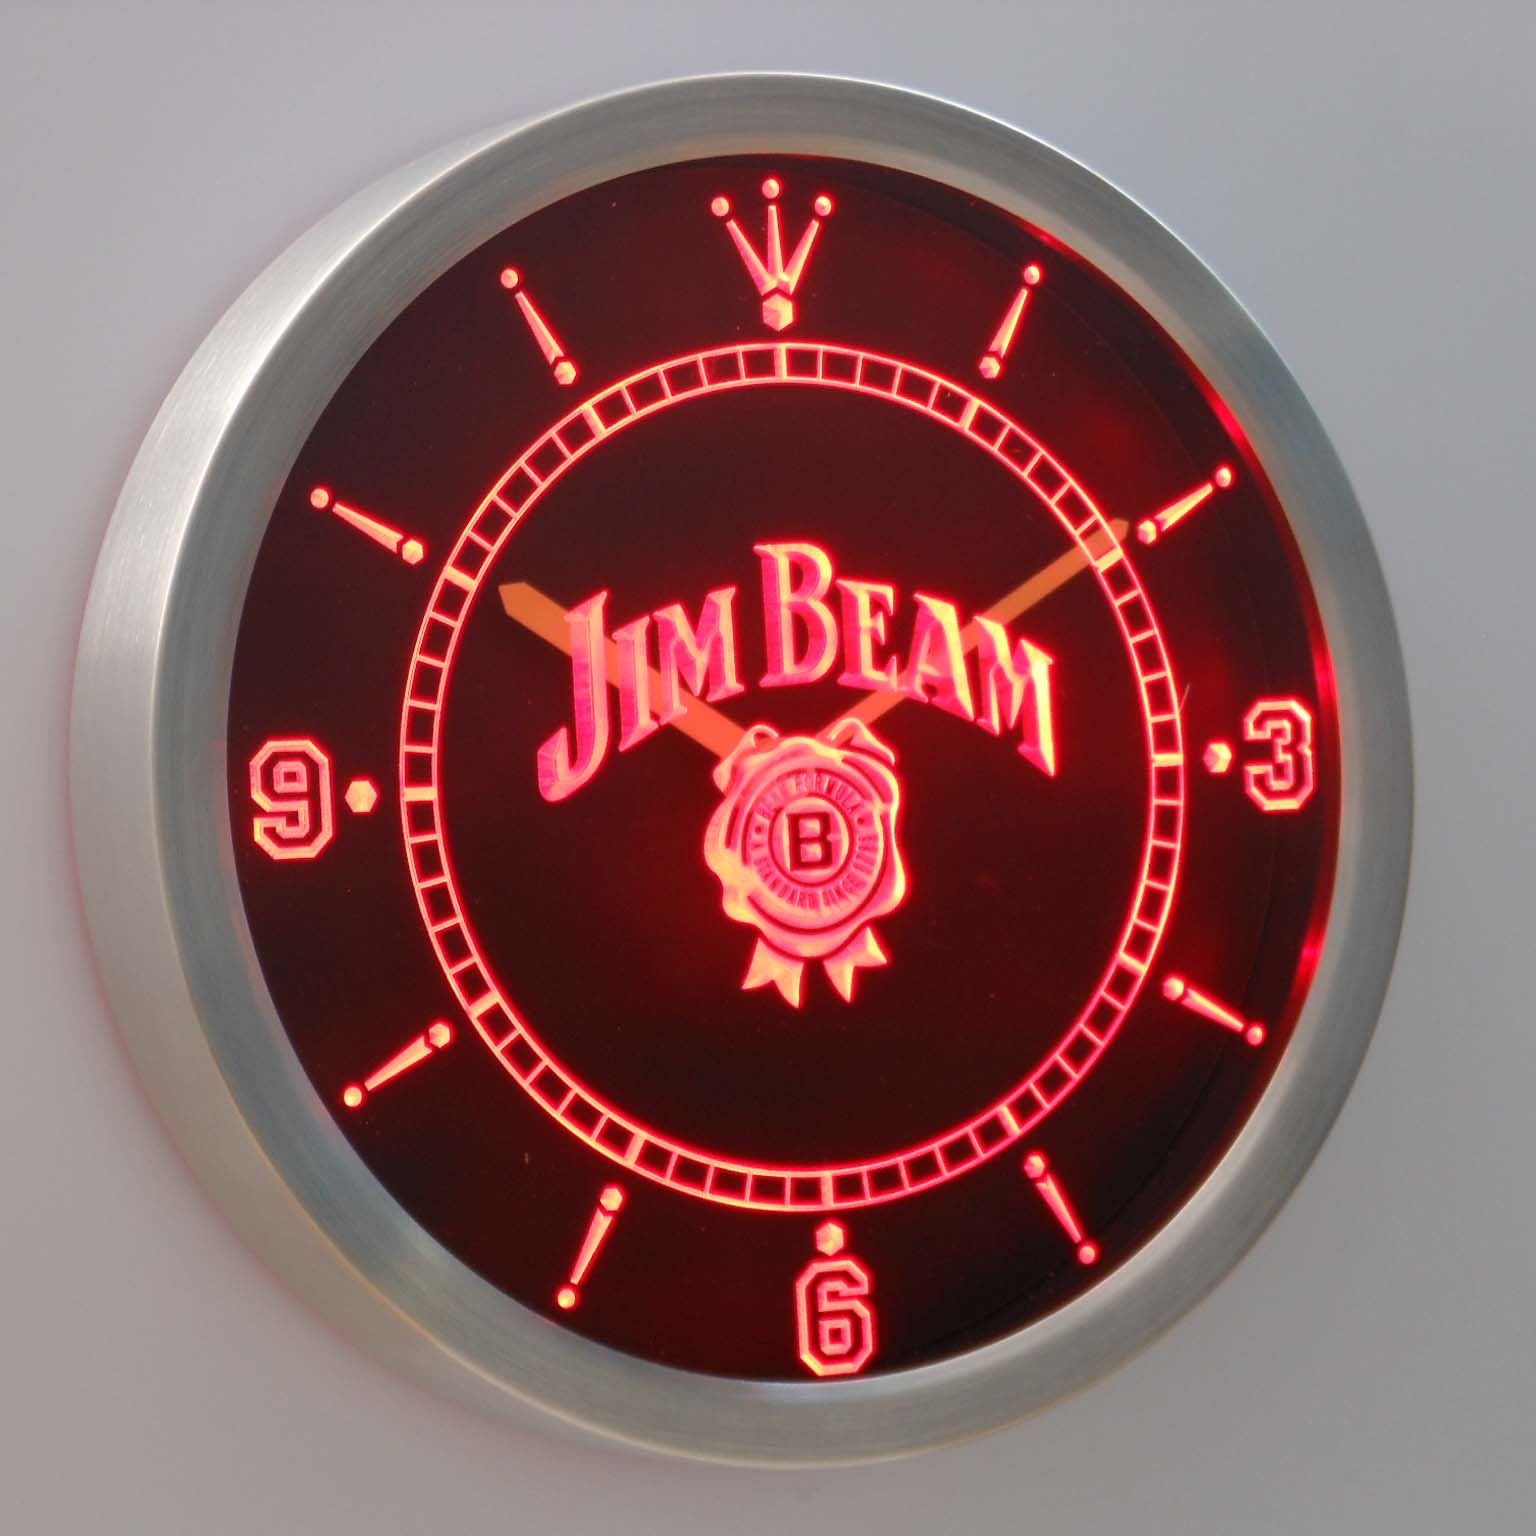 Jim Beam Wall Clock - The Best Picture Of Beam